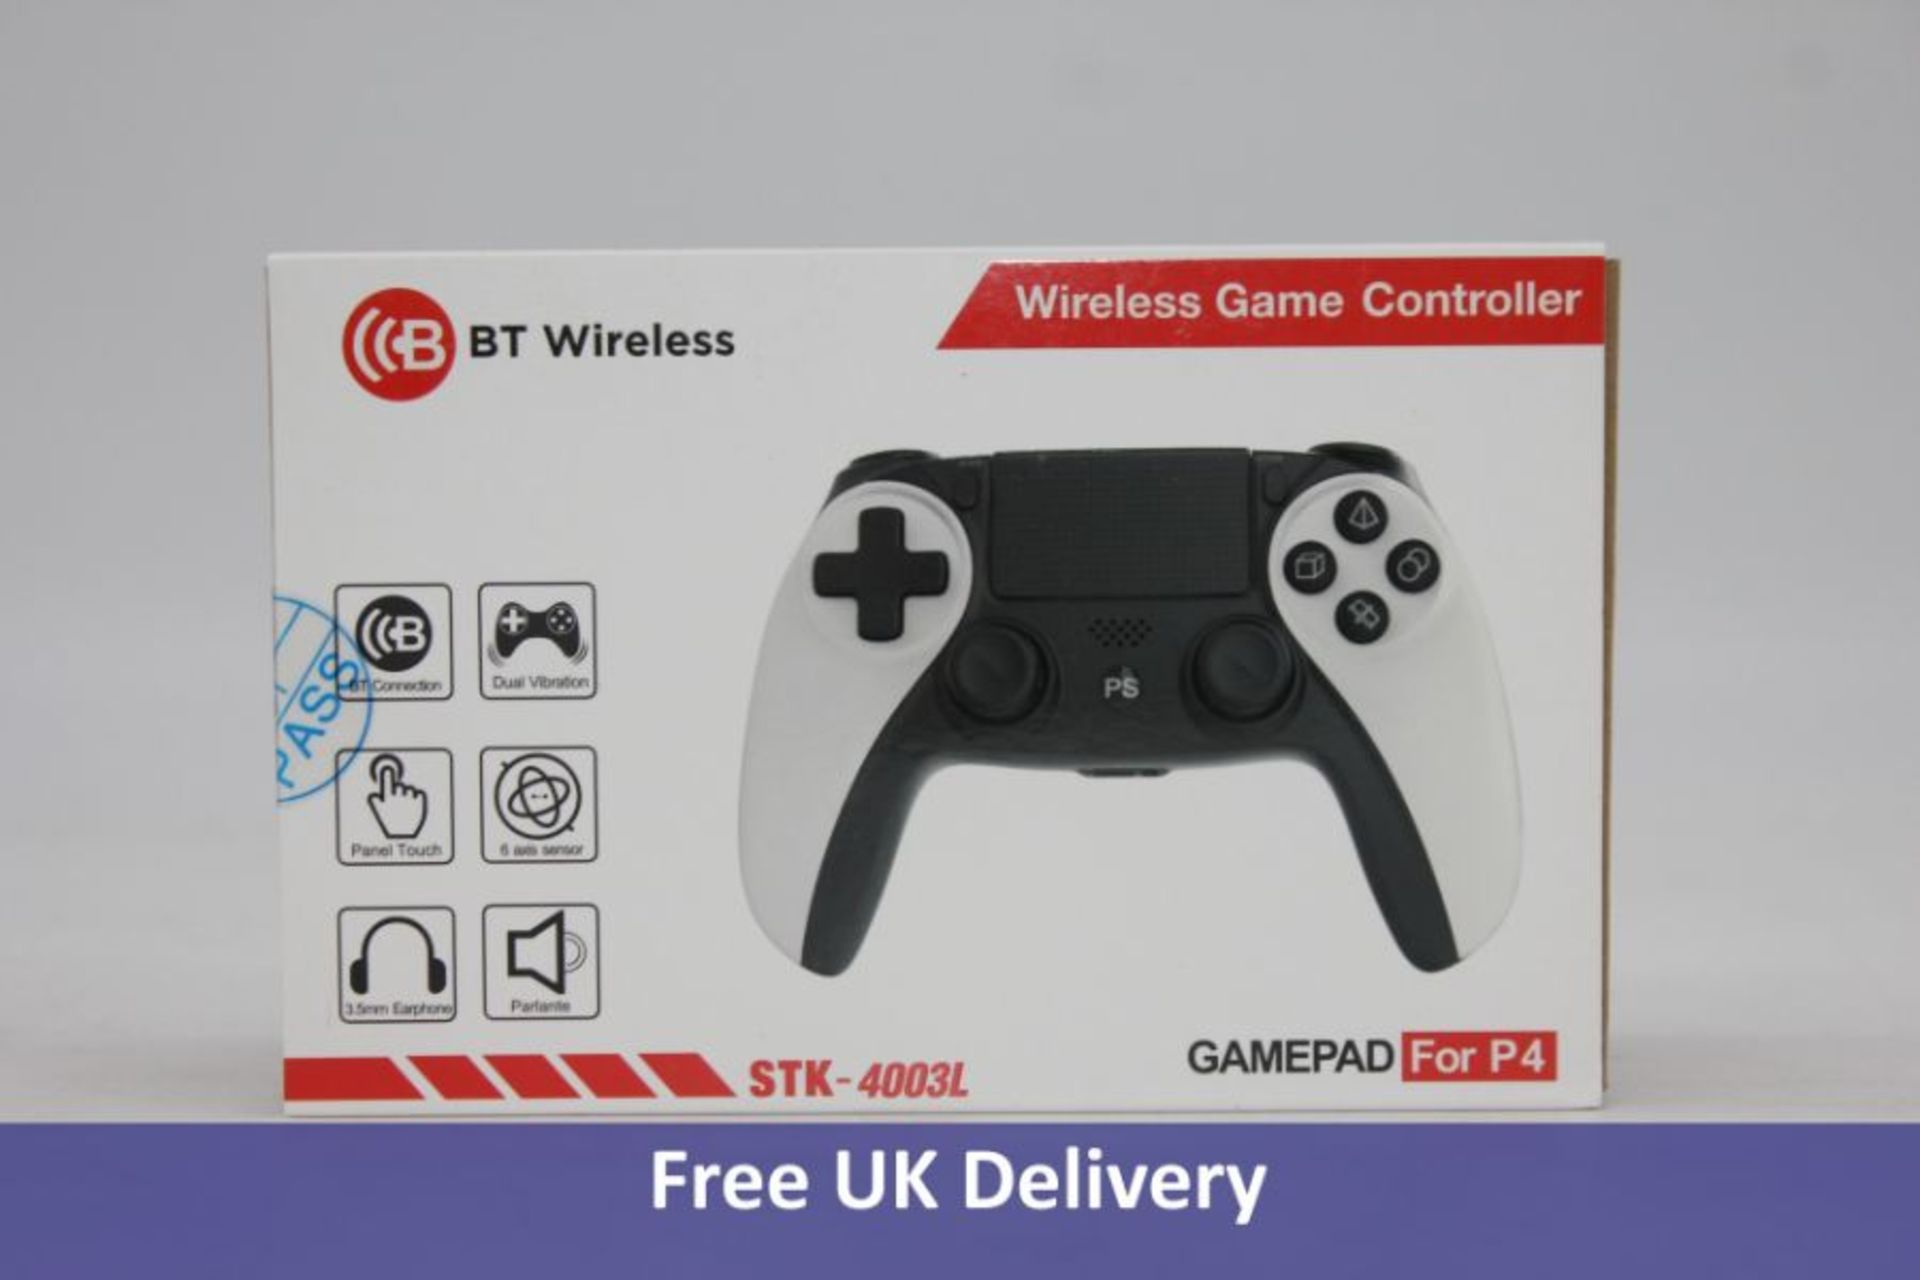 Twenty Bluetooth Wireless Game Pads For PS4, Black/White, STK-4003L - Image 2 of 5